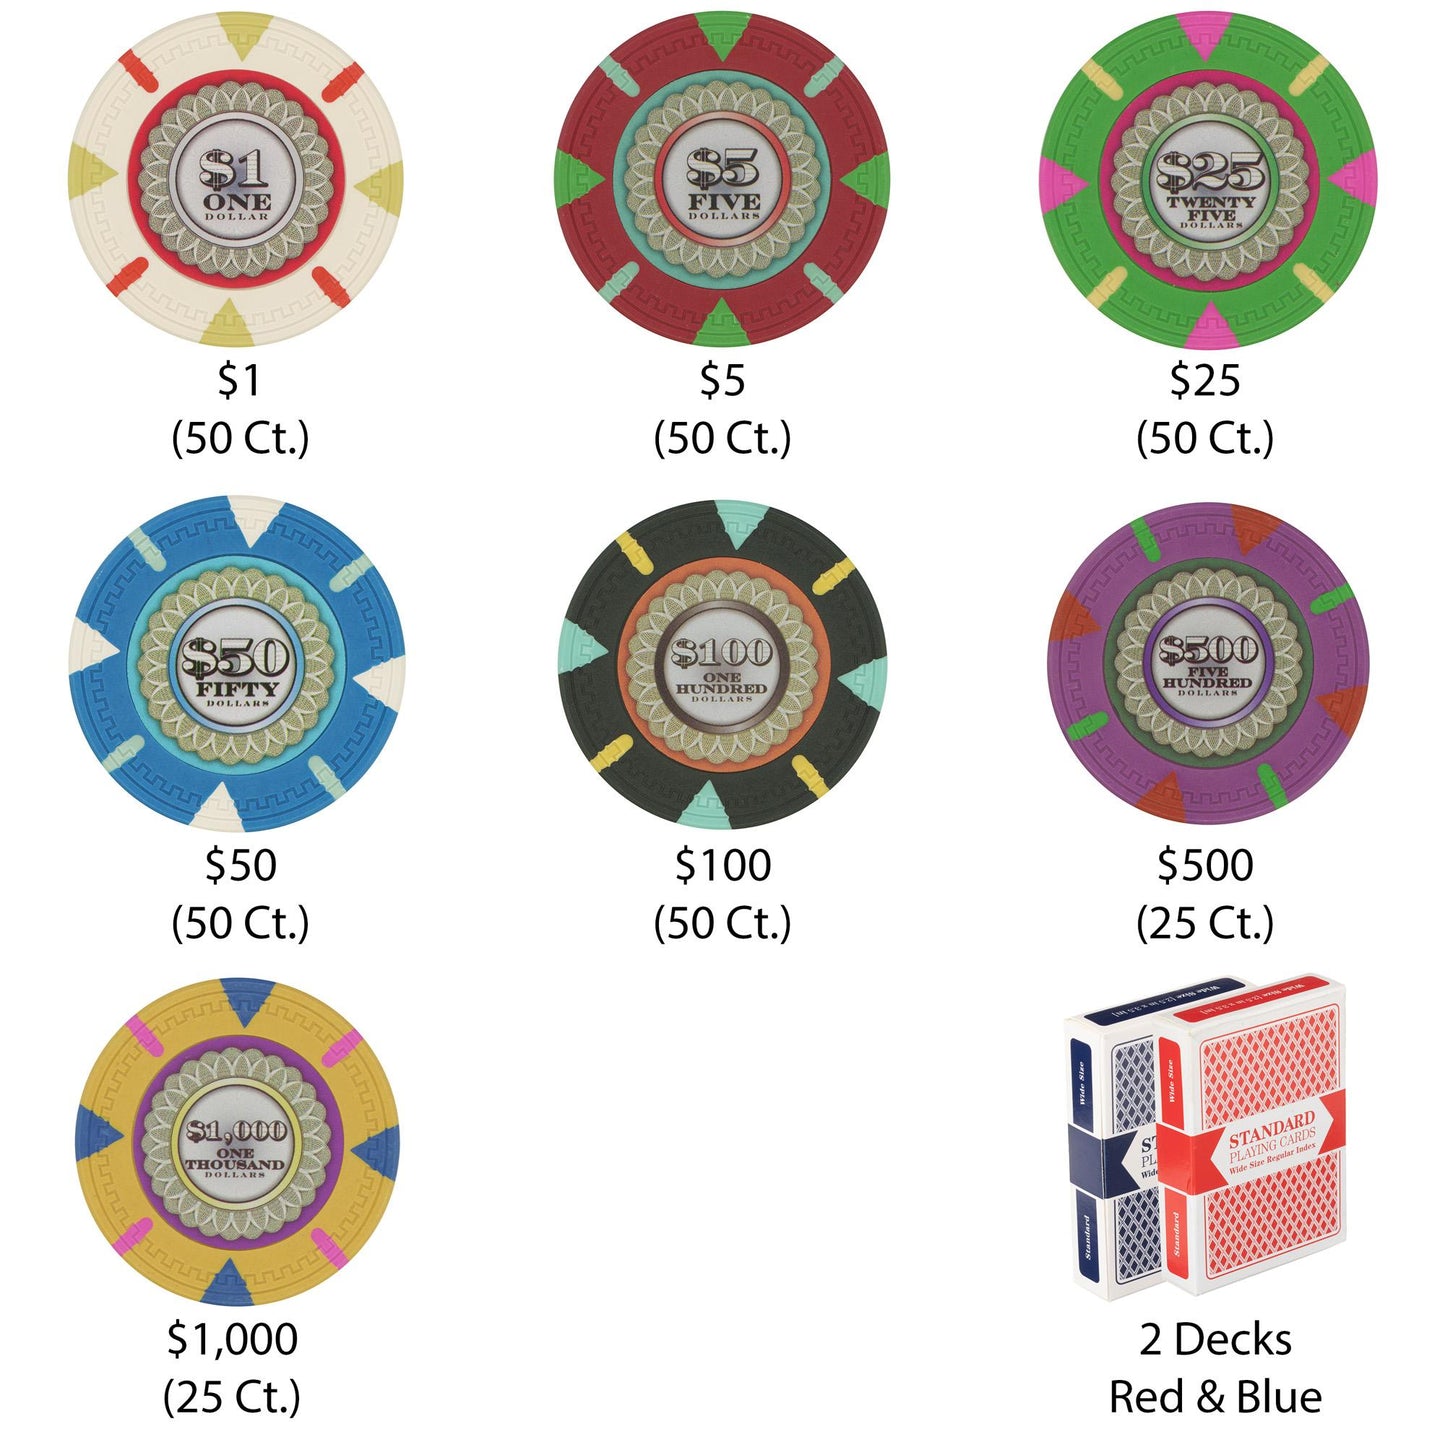 300 Mint Poker Chips with Wooden Carousel